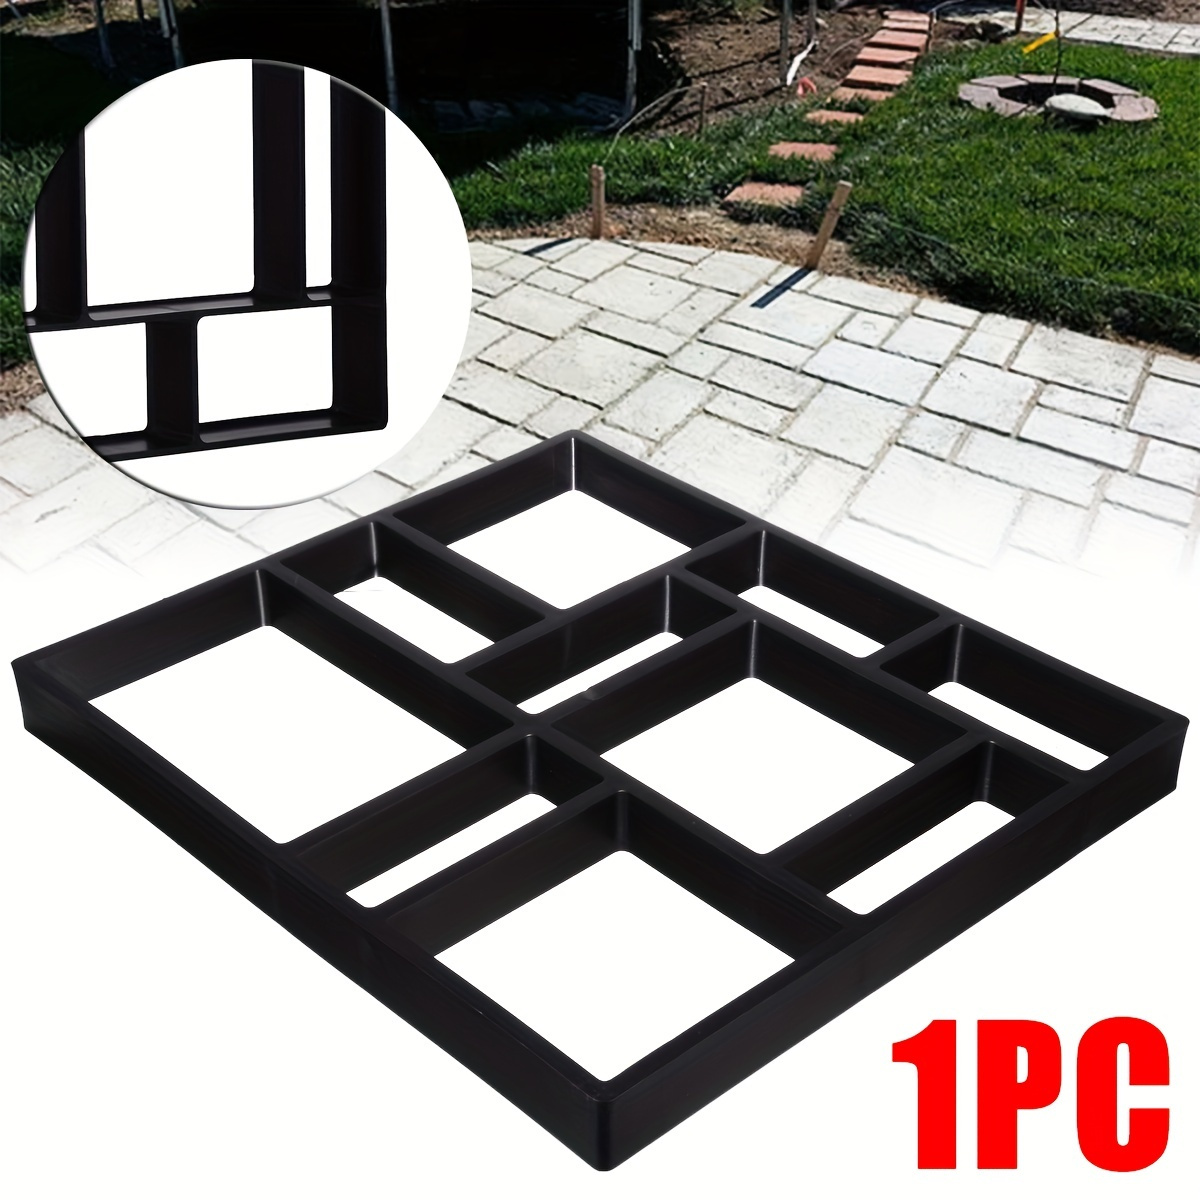 

Plastic Pavement Mold, 10-grid Garden Walkway Maker, Reusable Concrete Cement Stone Design Paver Mold, 17.7"x15.7" Outdoor Stepping Stone Mould, Easy To Use Patio Pathway Maker